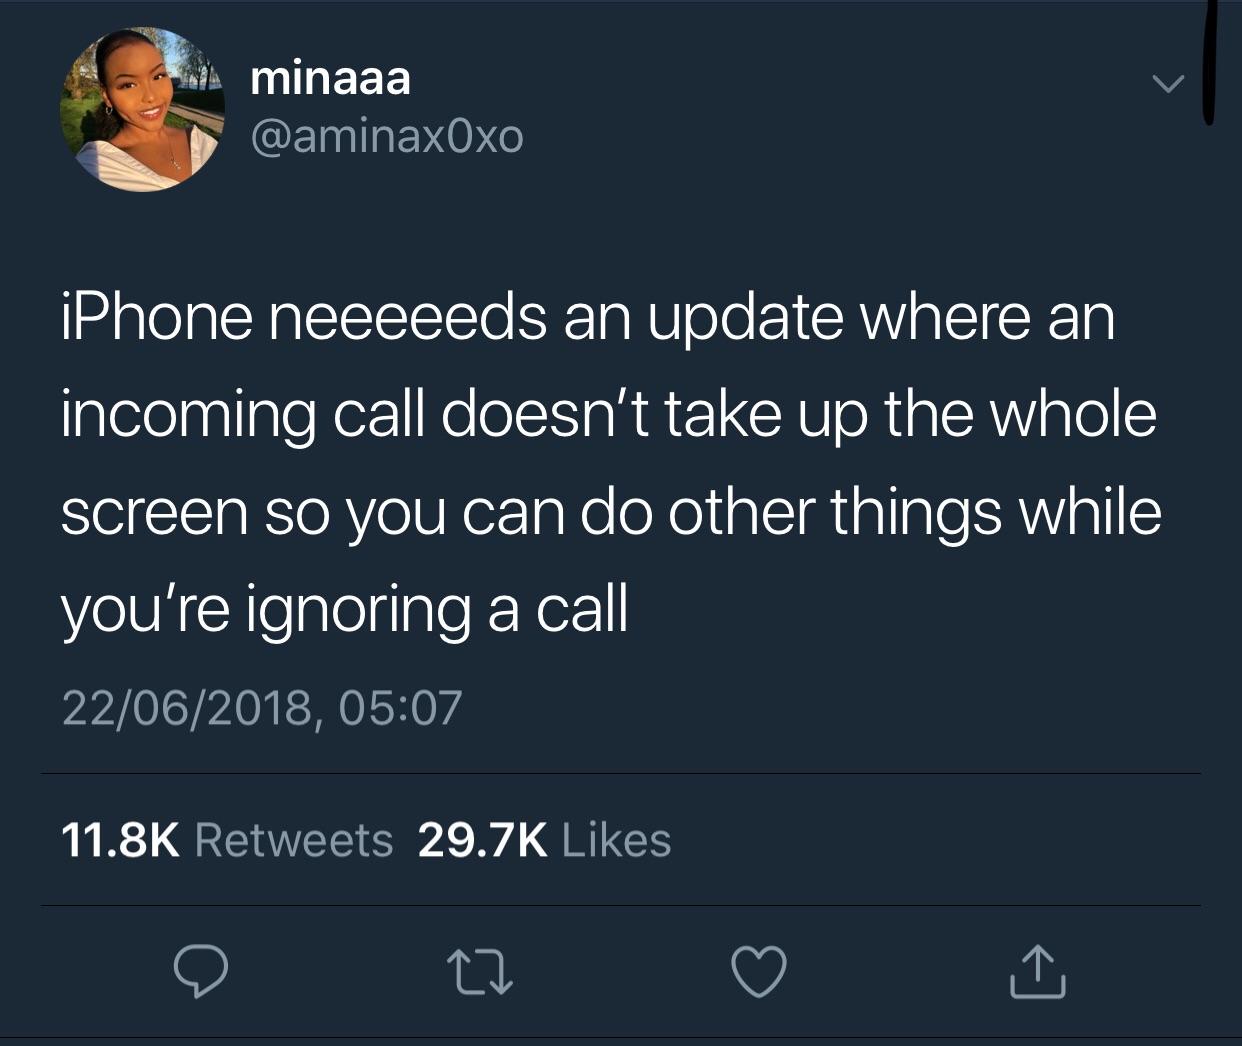 real talk twitter - minaaa iPhone neeeeeds an update where an incoming call doesn't take up the whole screen so you can do other things while you're ignoring a call 22062018, o 22